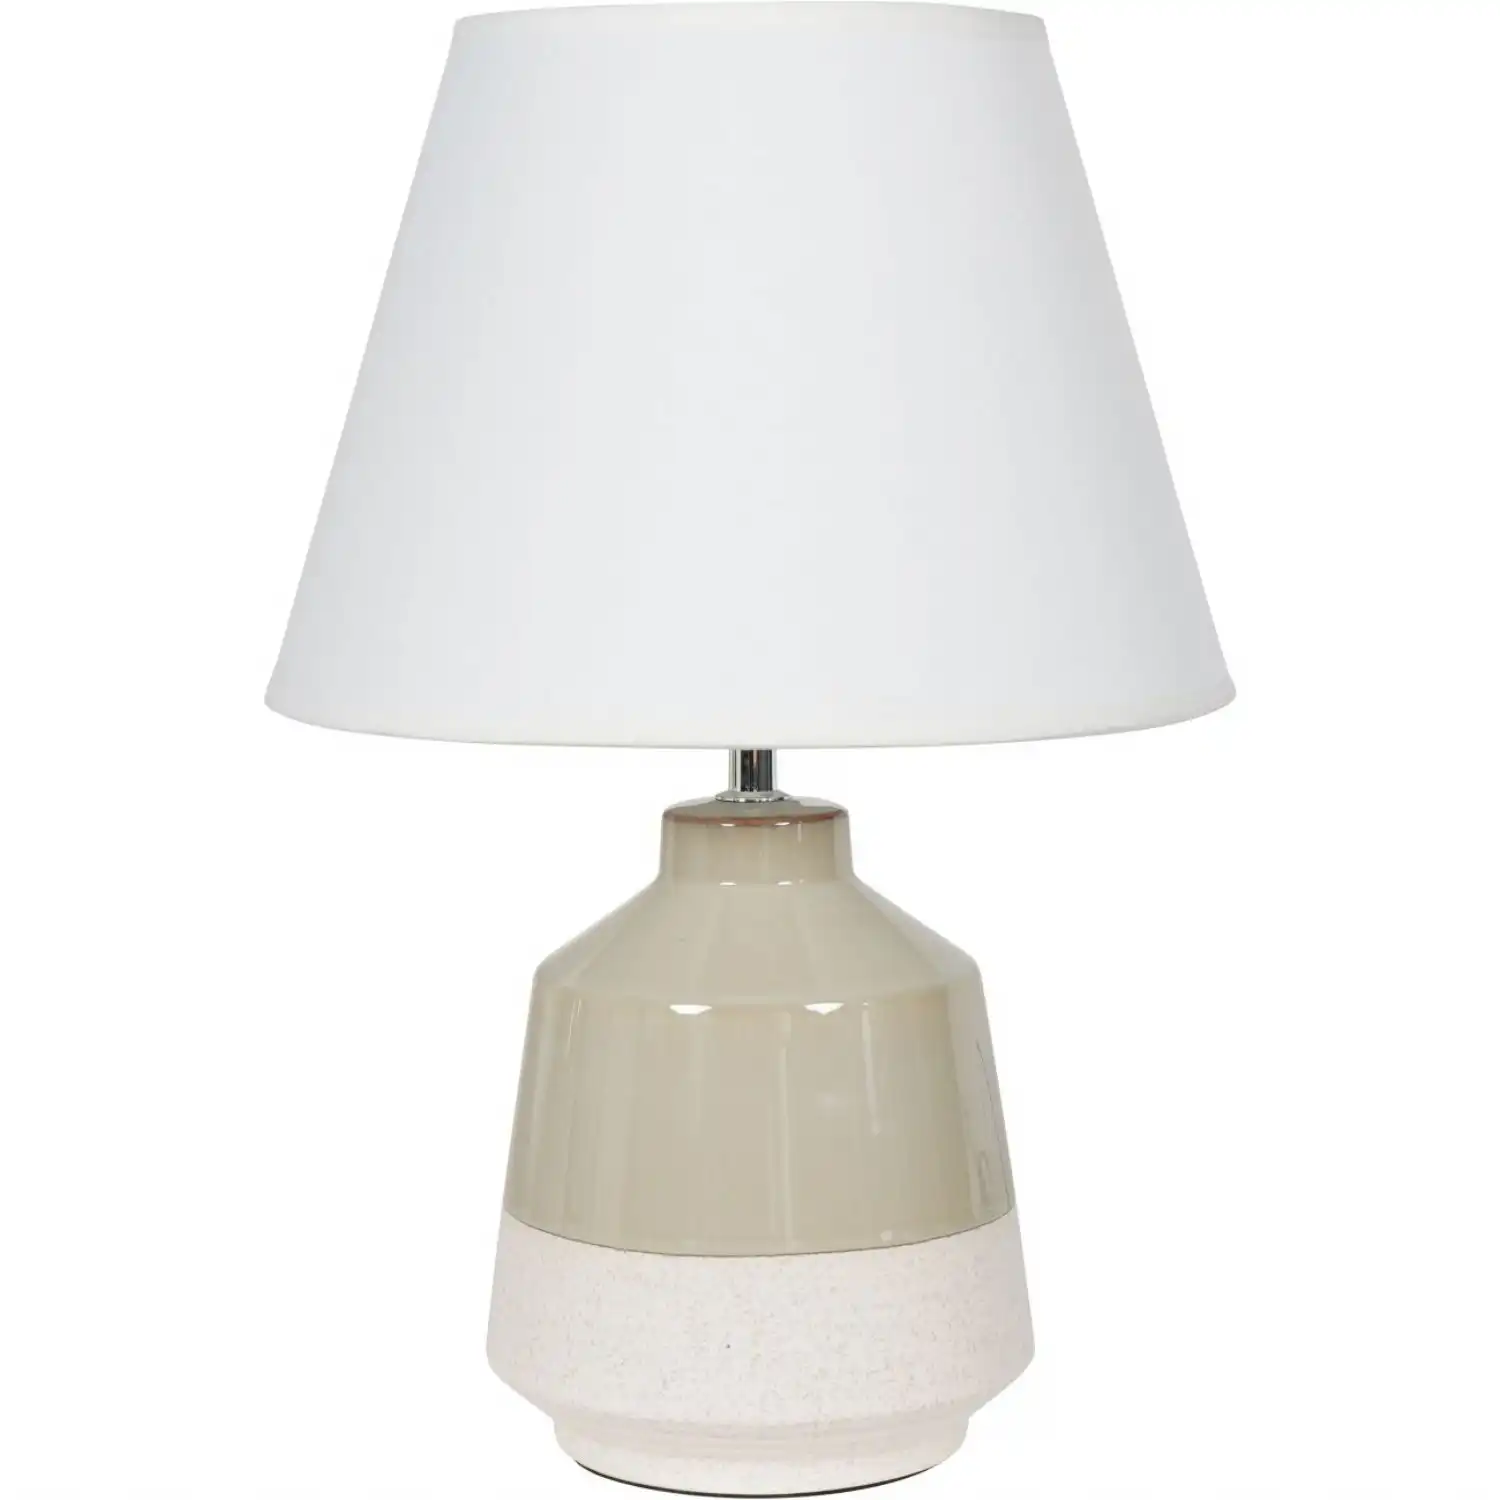 Green Dipped Glaze Table Lamp 44cm with Ivory Shade